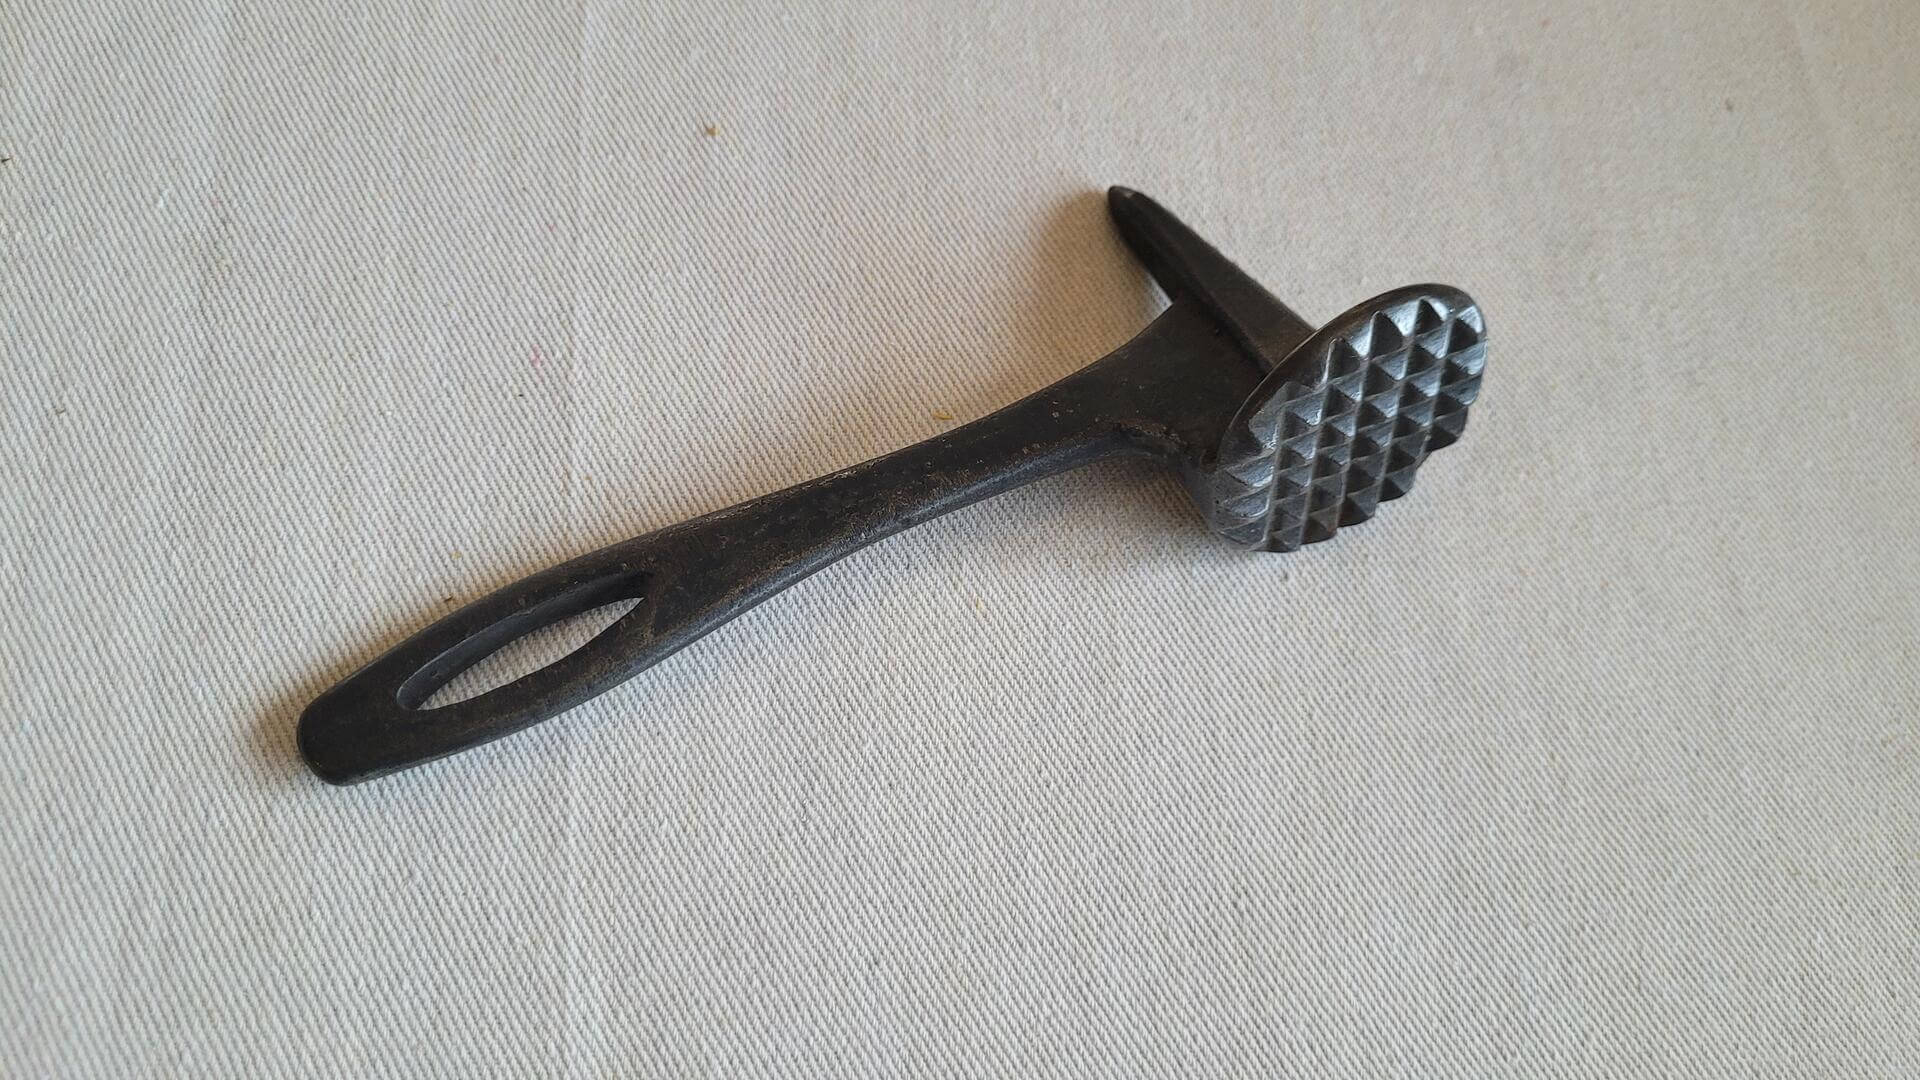 Vintage farmhouse cast iron meat tenderizer cooking hammer tool with serrated teeth and pick 8 inches long